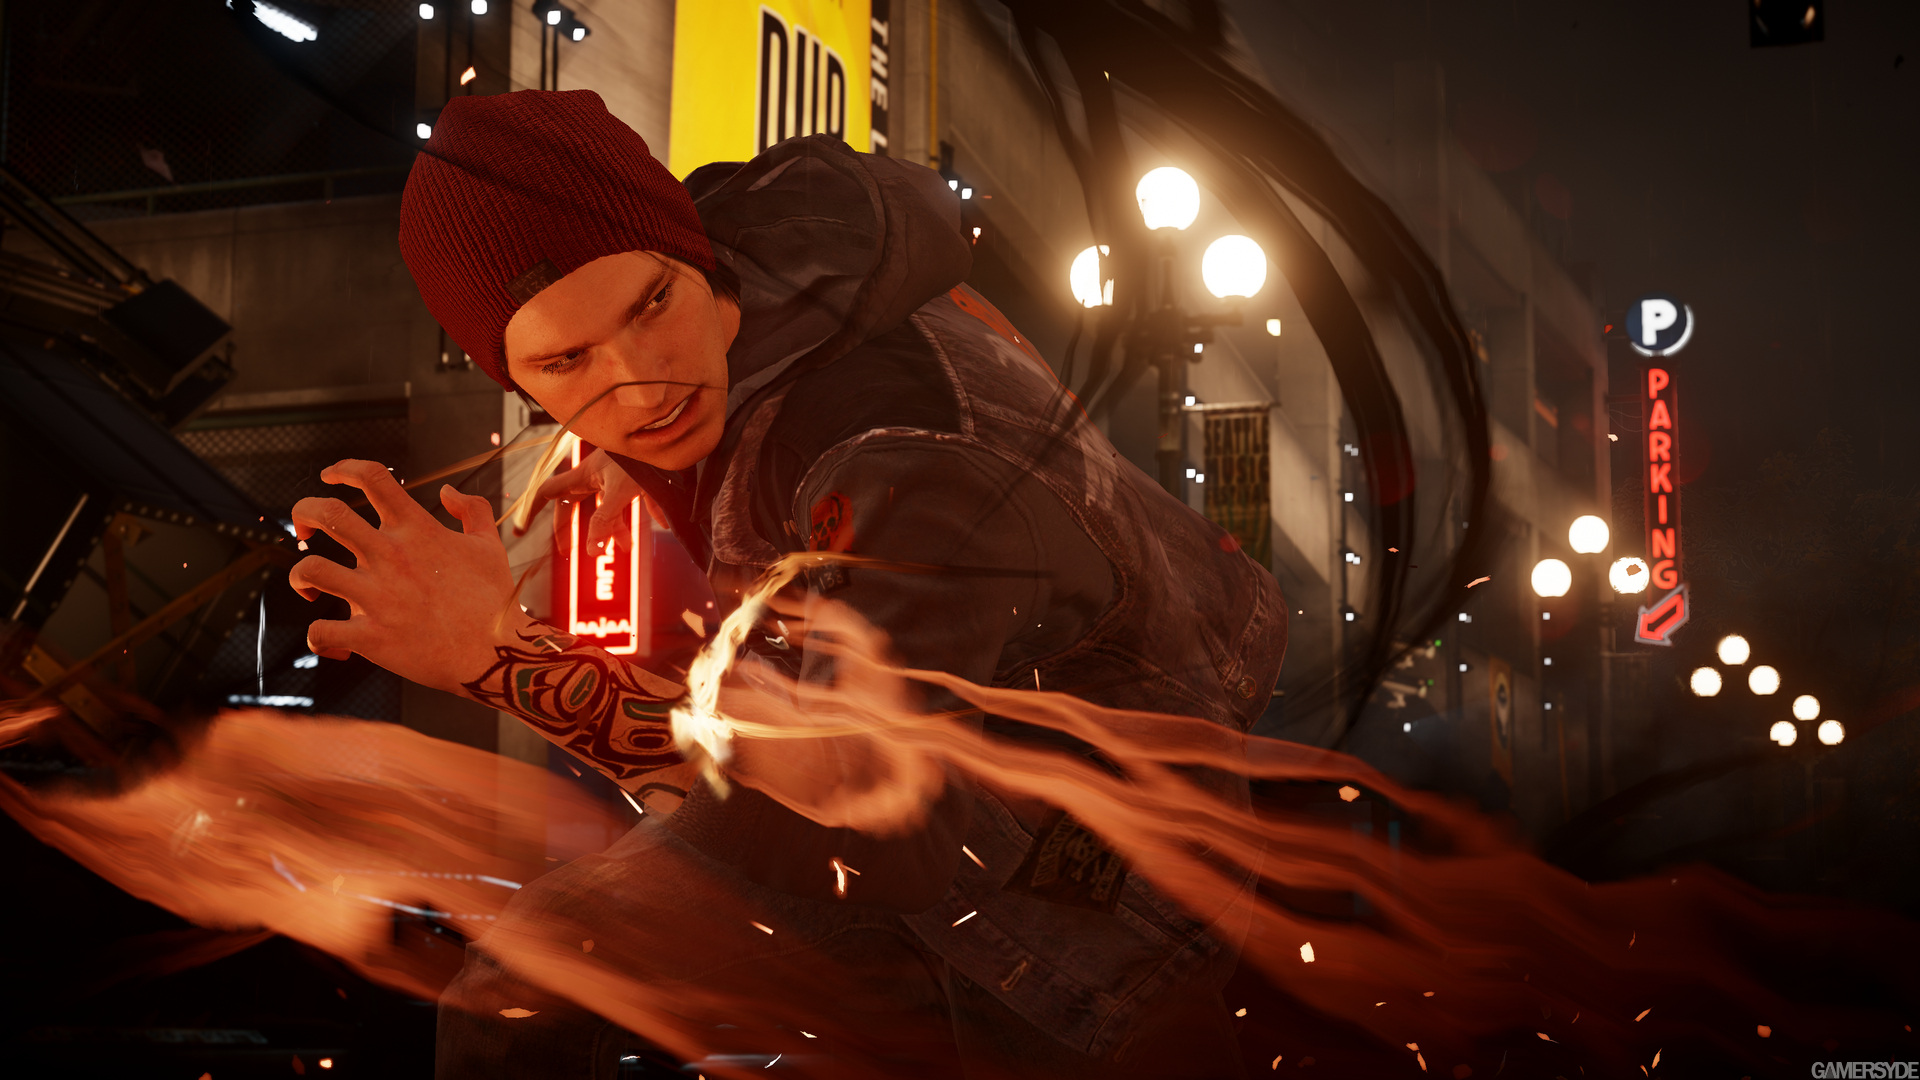 image_infamous_second_son-22858-2661_0004.jpg